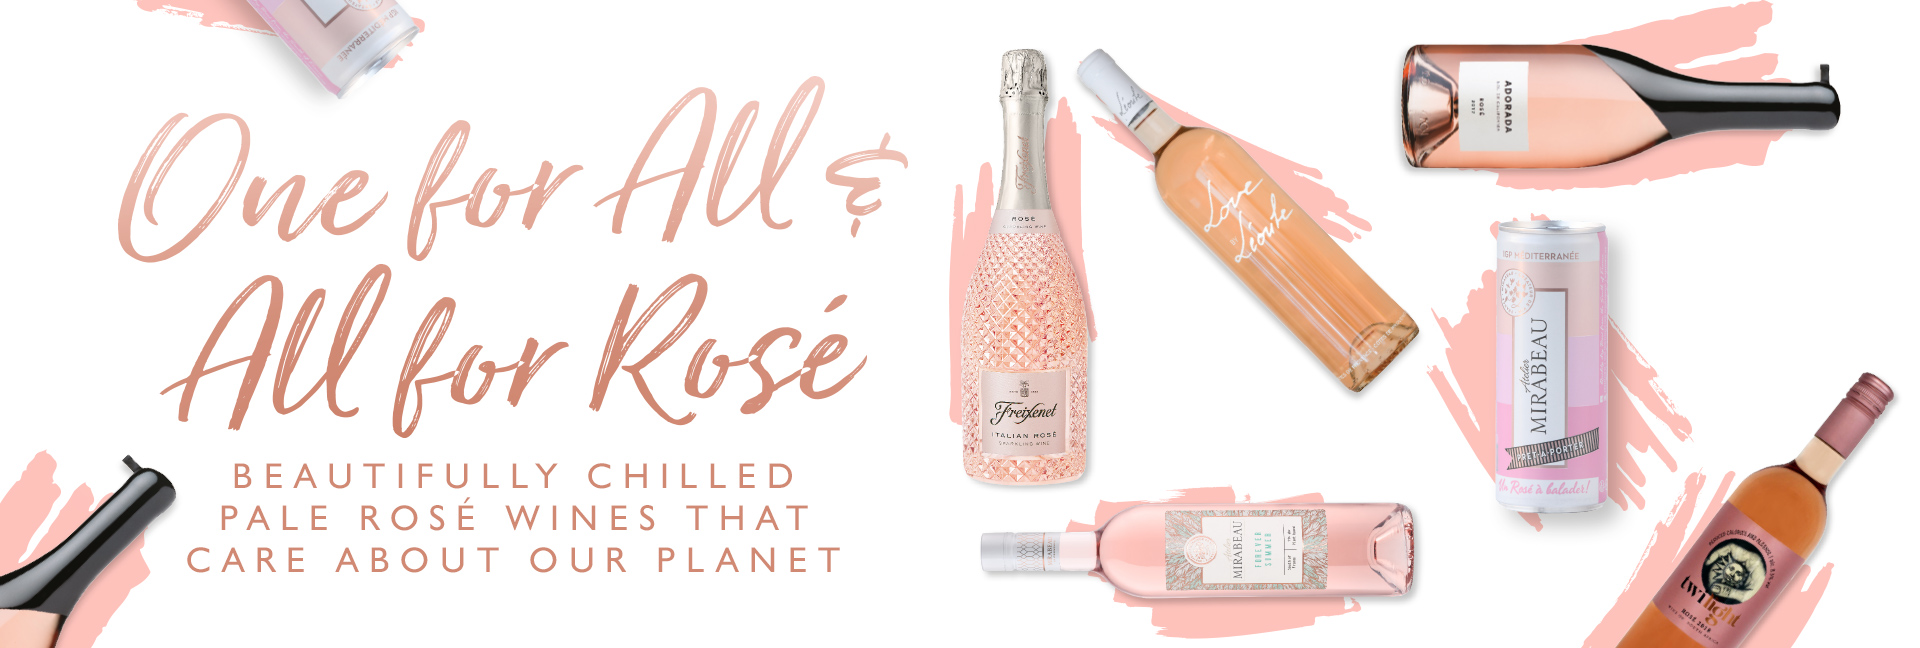 One For All & All For Rosé at All Bar One